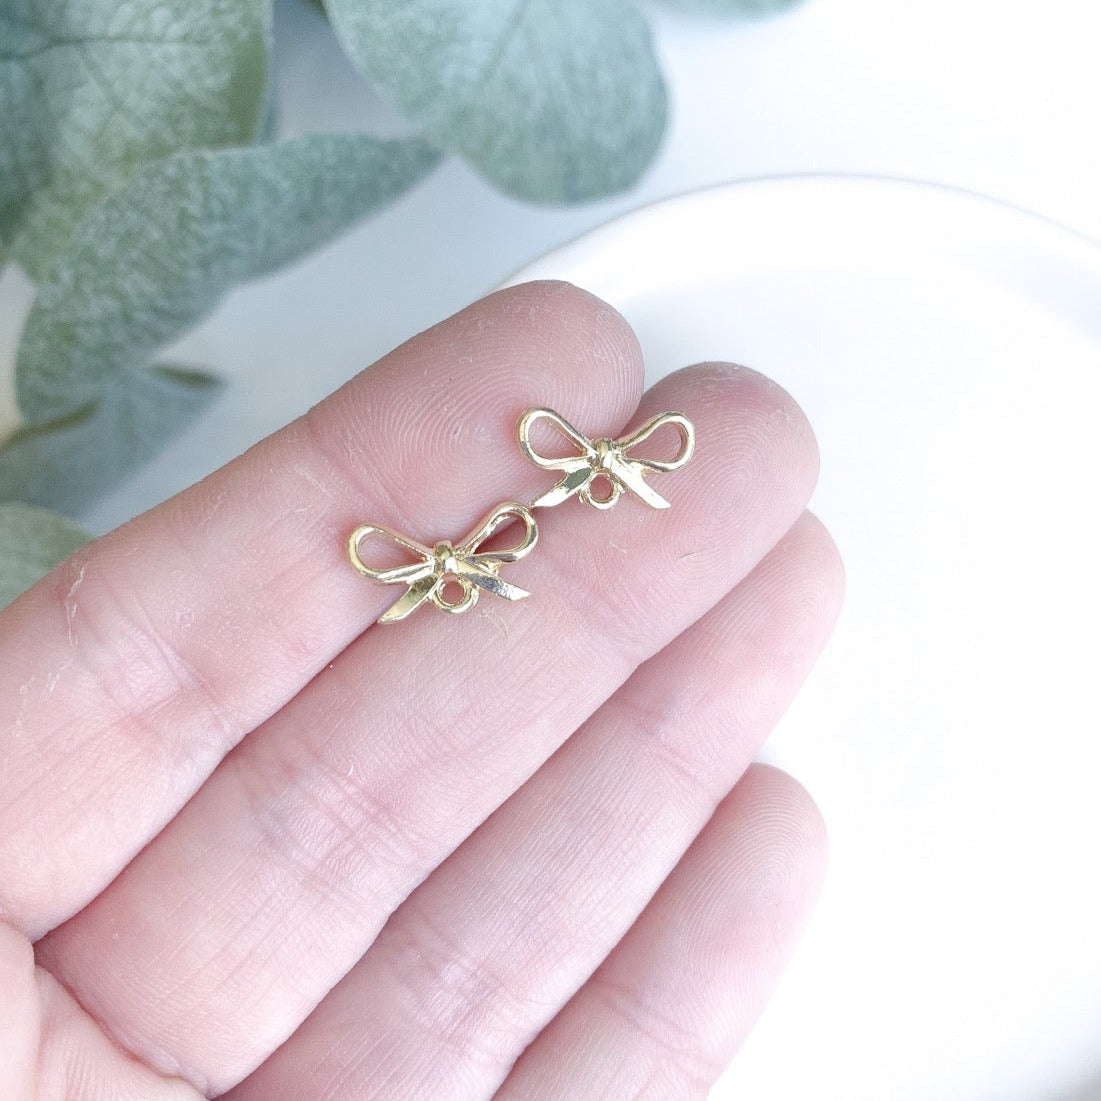 Bow Stud Finding - 10 Pieces